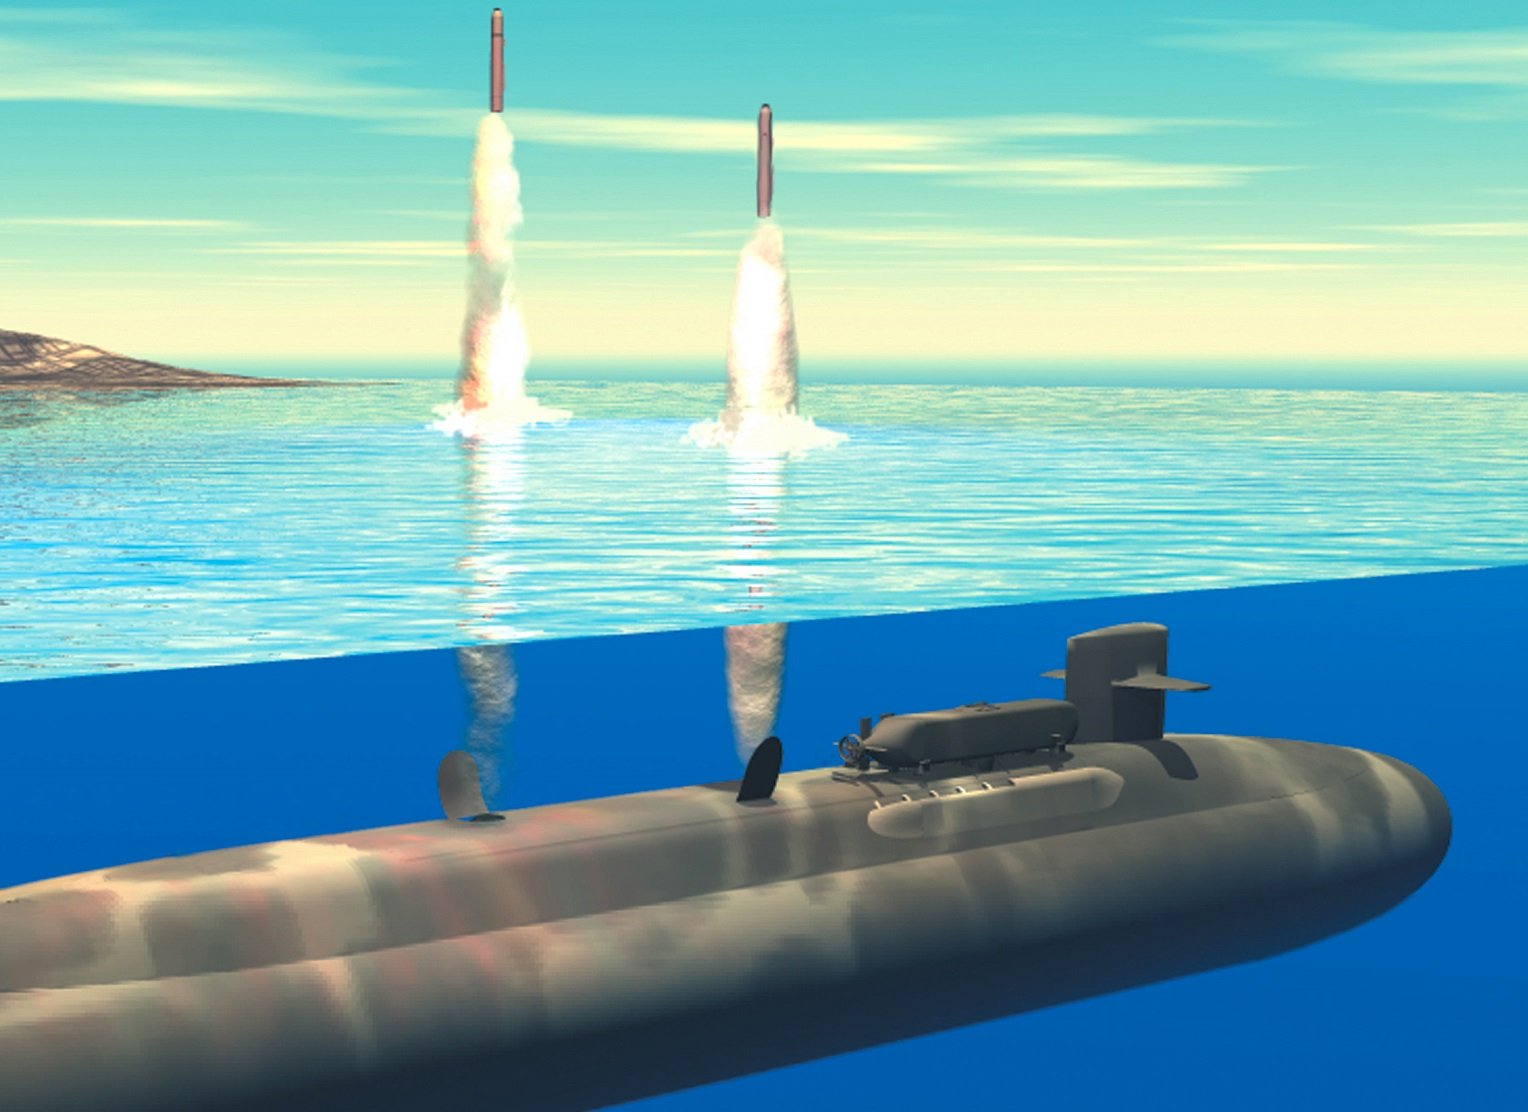 This Old U.S. Navy Nuclear Submarine Could Nuke 24 Cities (In One Shot